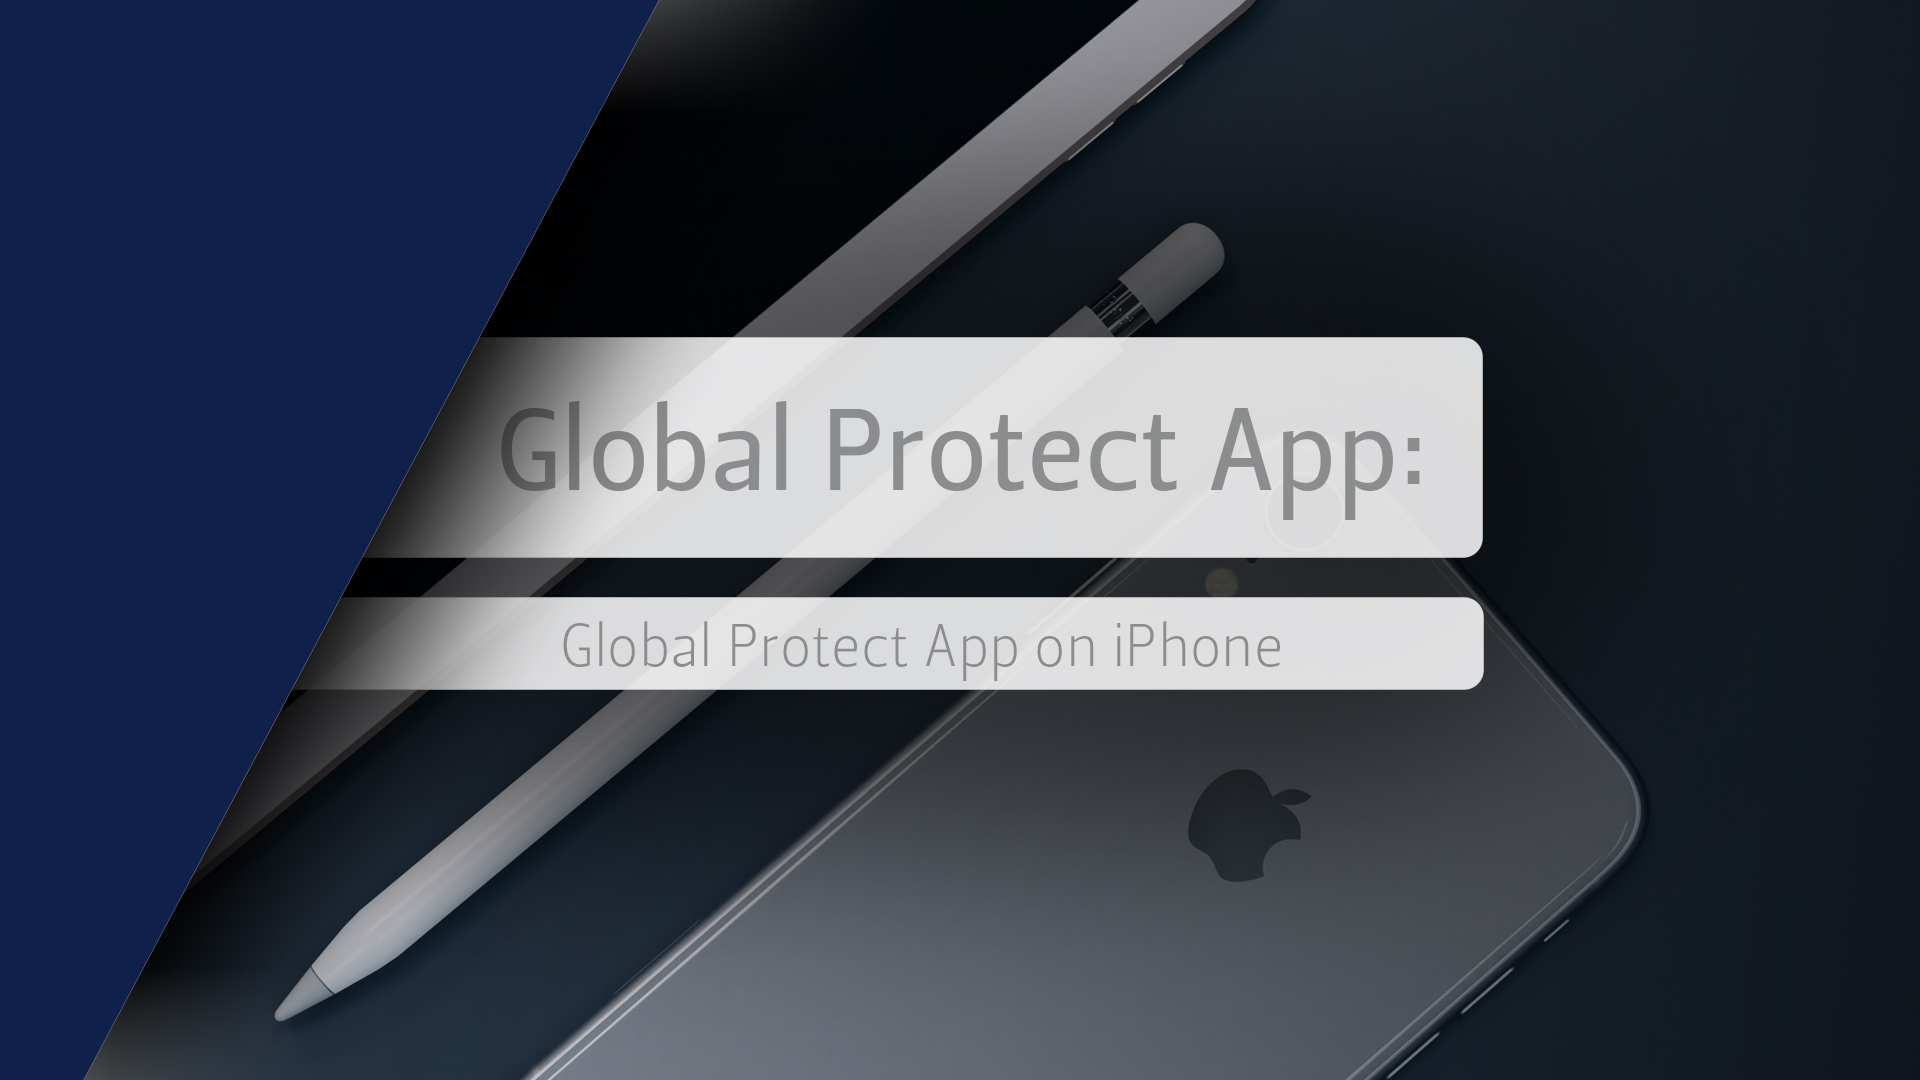 Global Protect App on iPhone